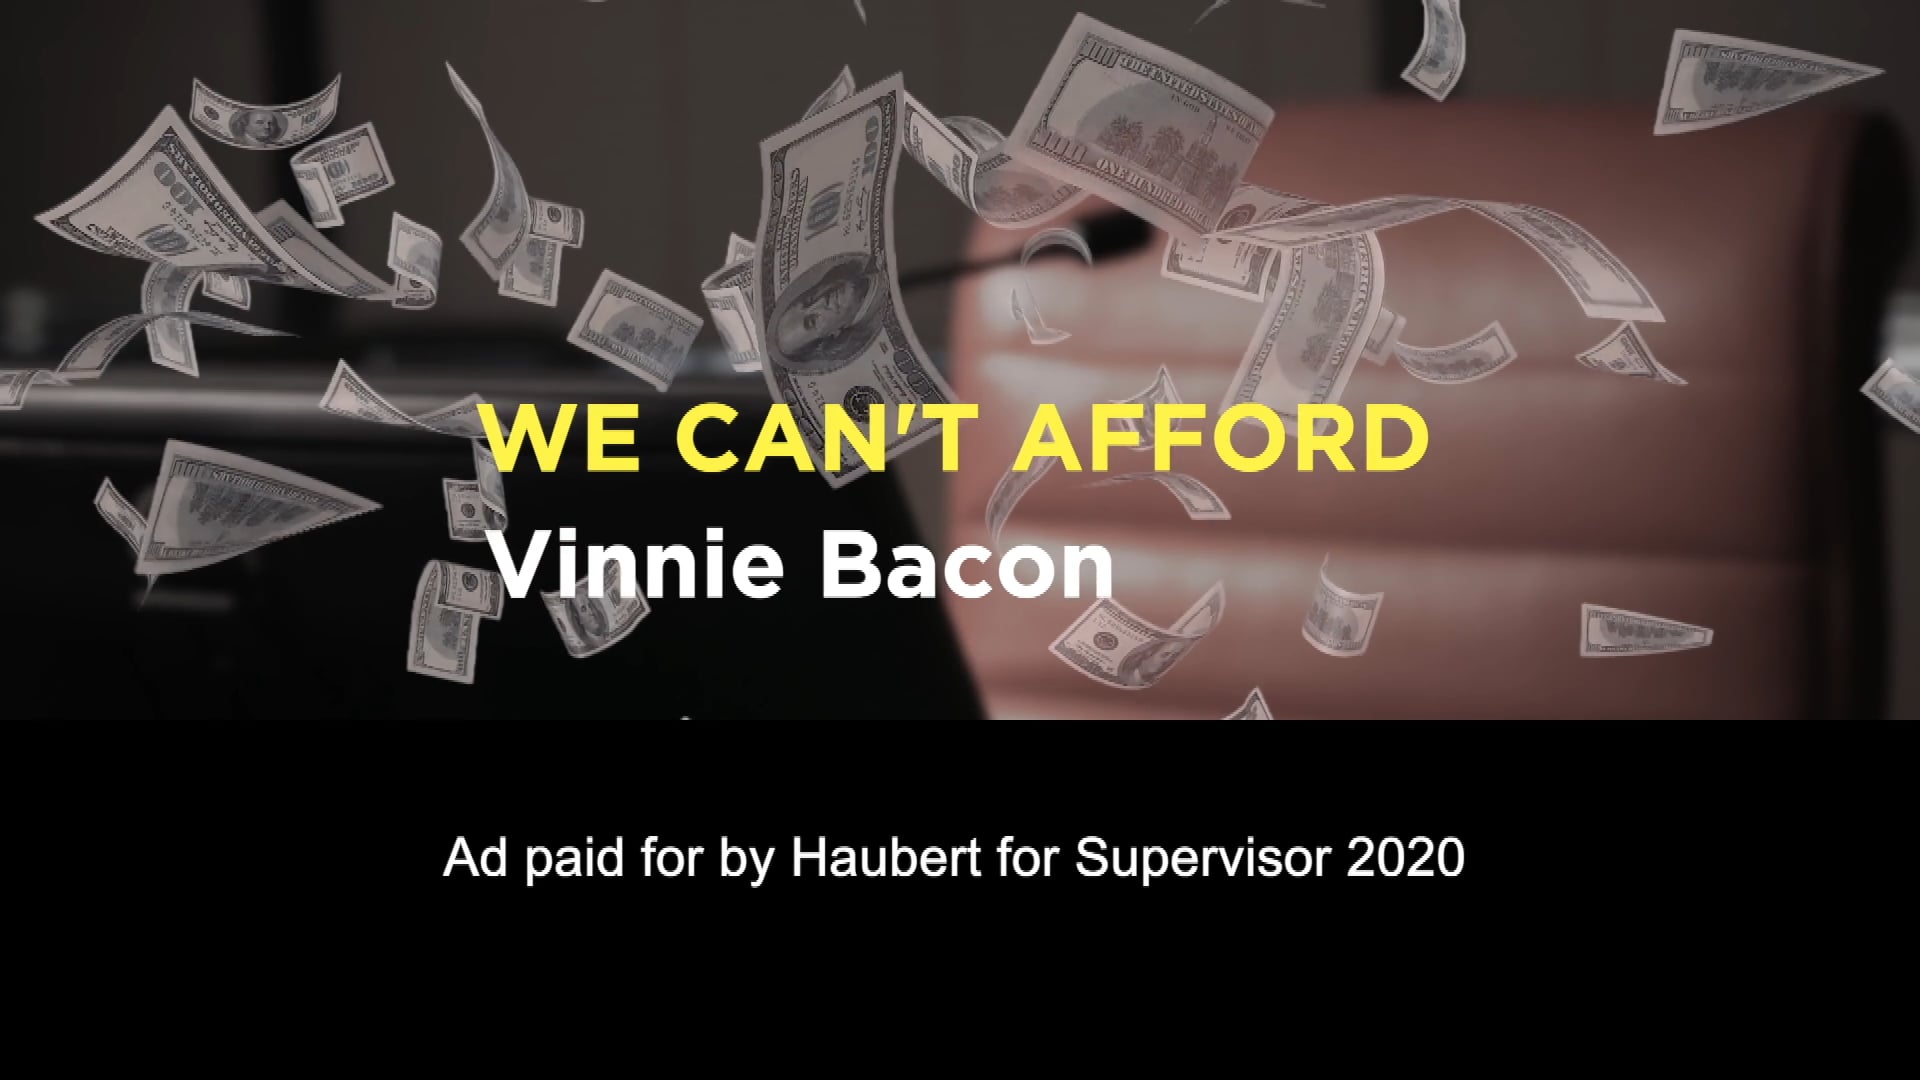 We Can't afford Vinnie Bacon